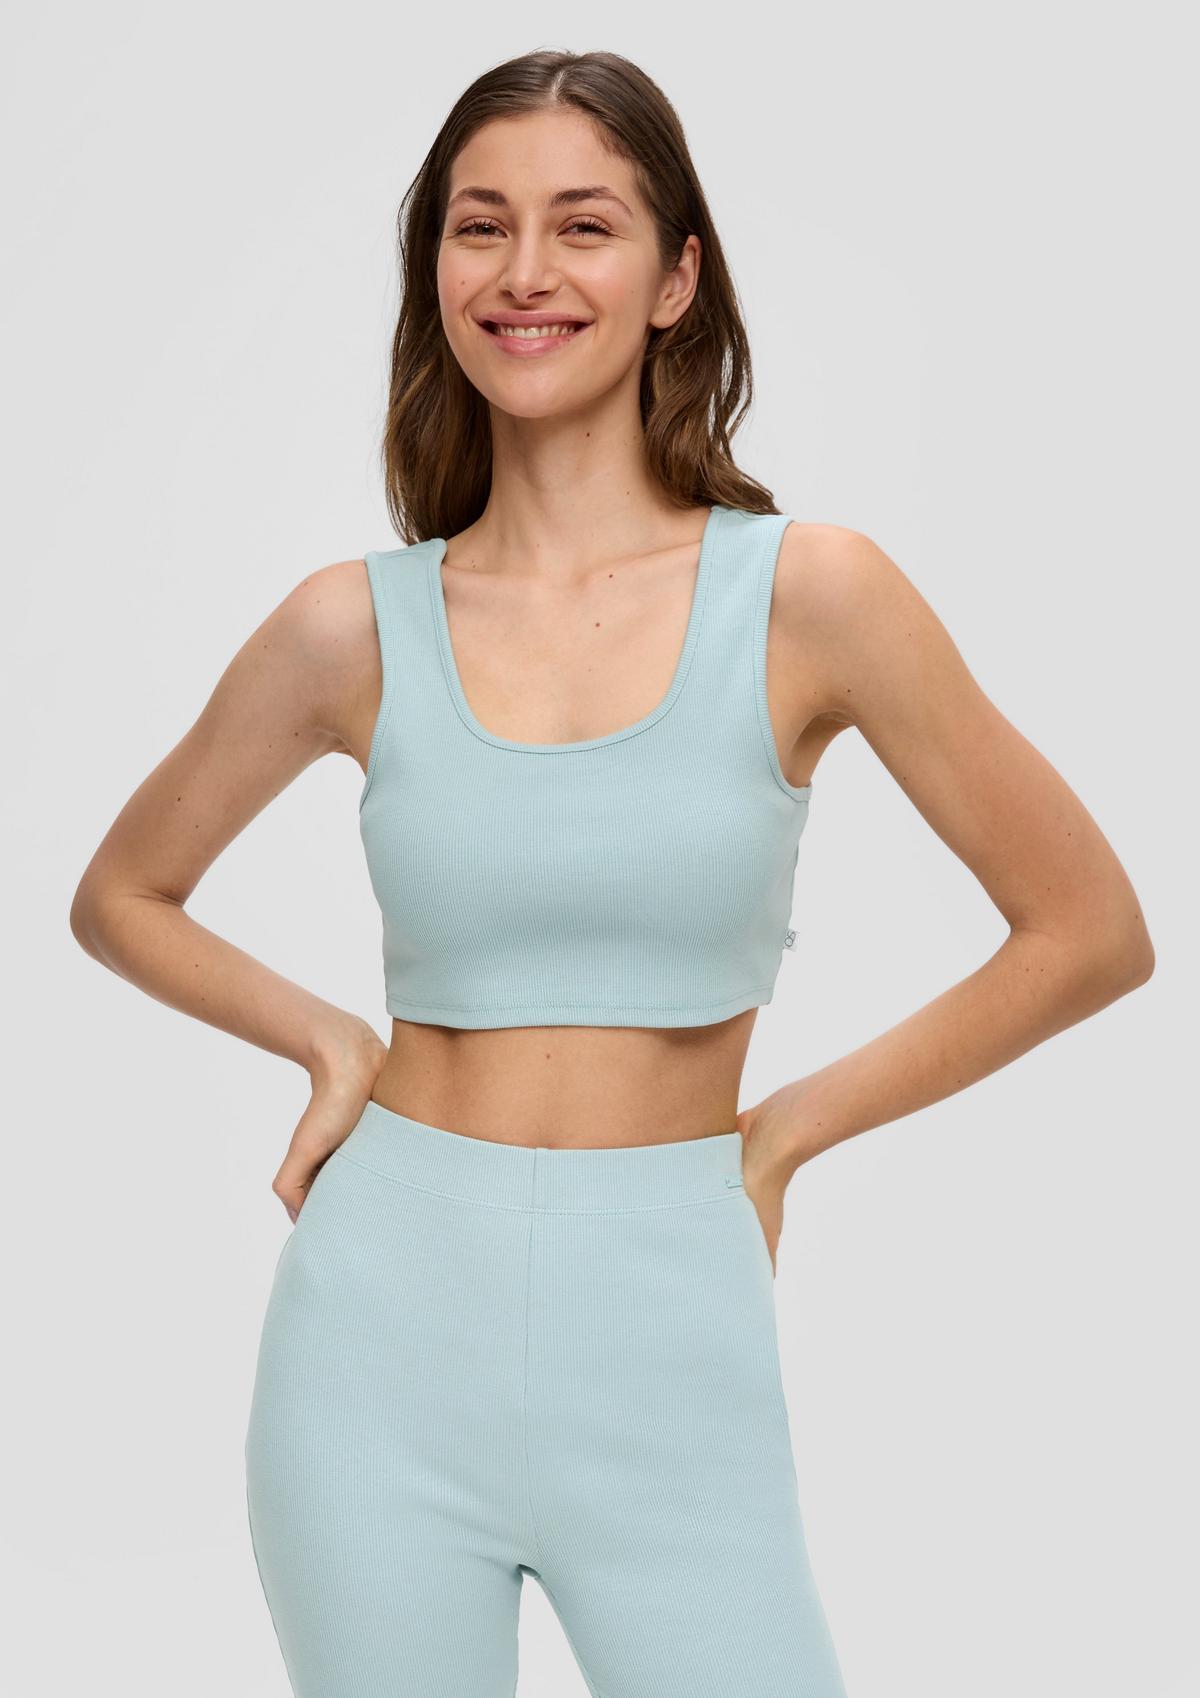 Top made of ribbed fabric